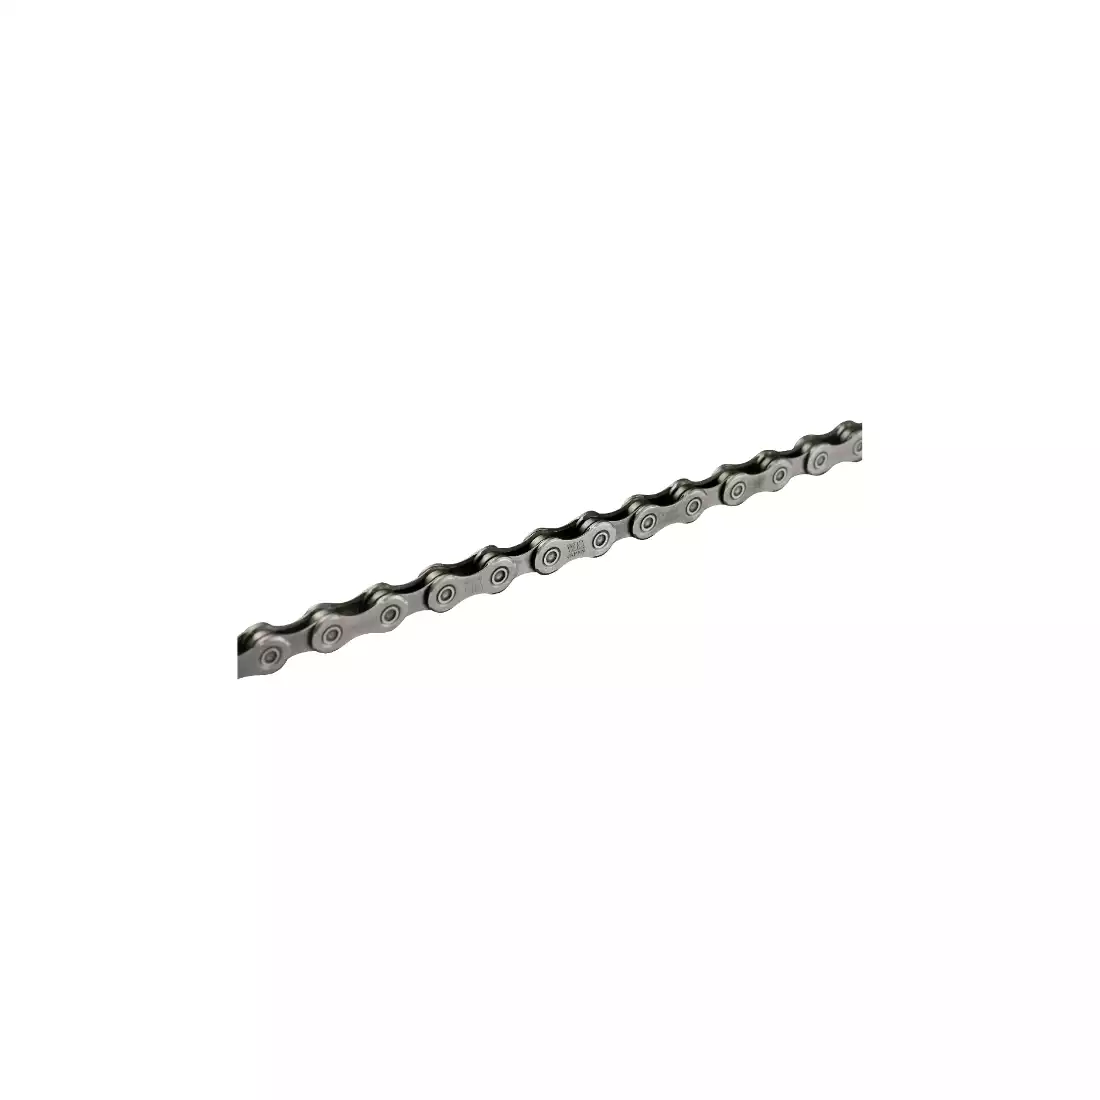 SHIMANO HG-701 Bicycle chain 11-speed, 116 links